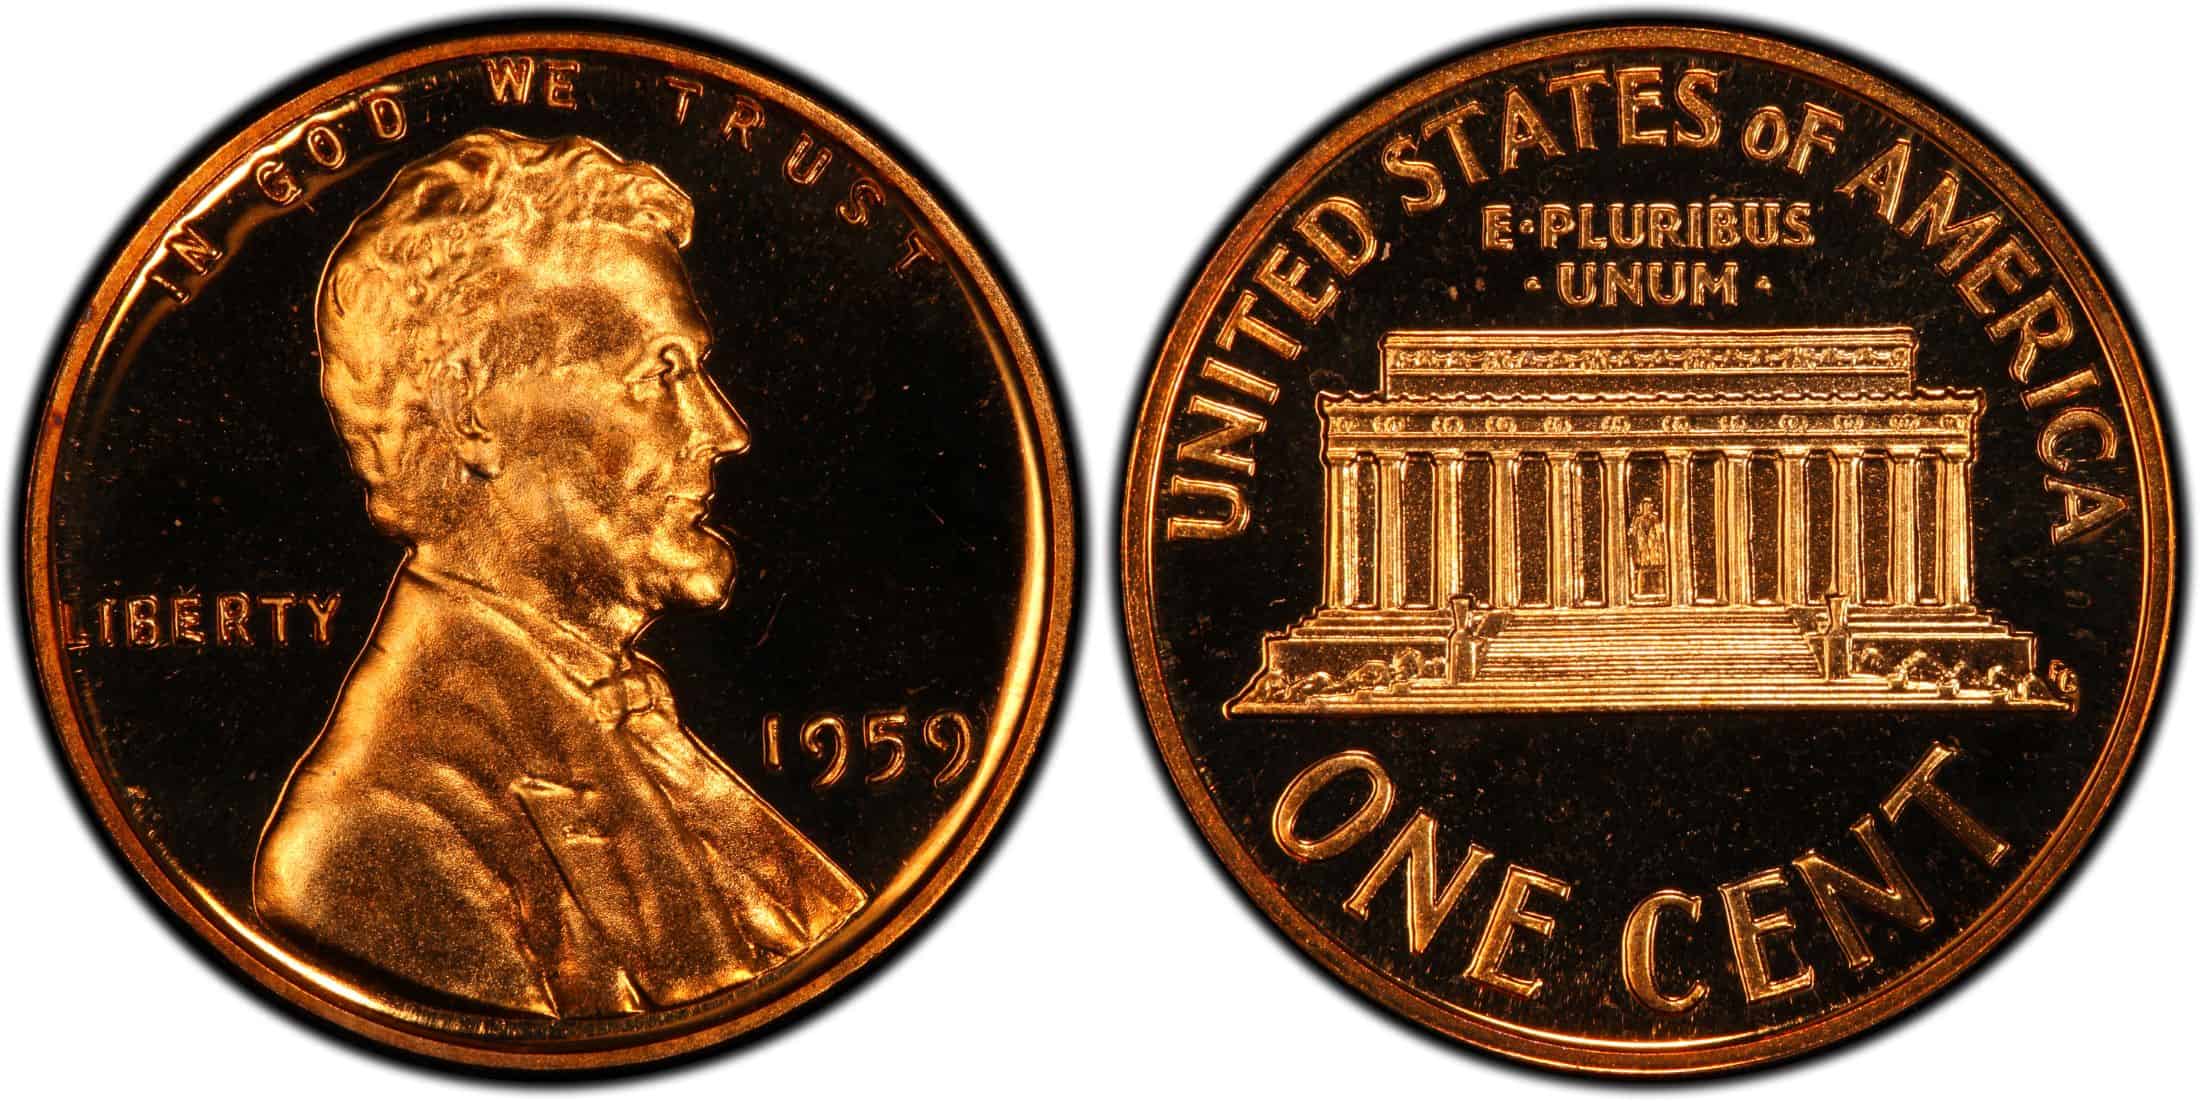 1959 proof Lincoln penny